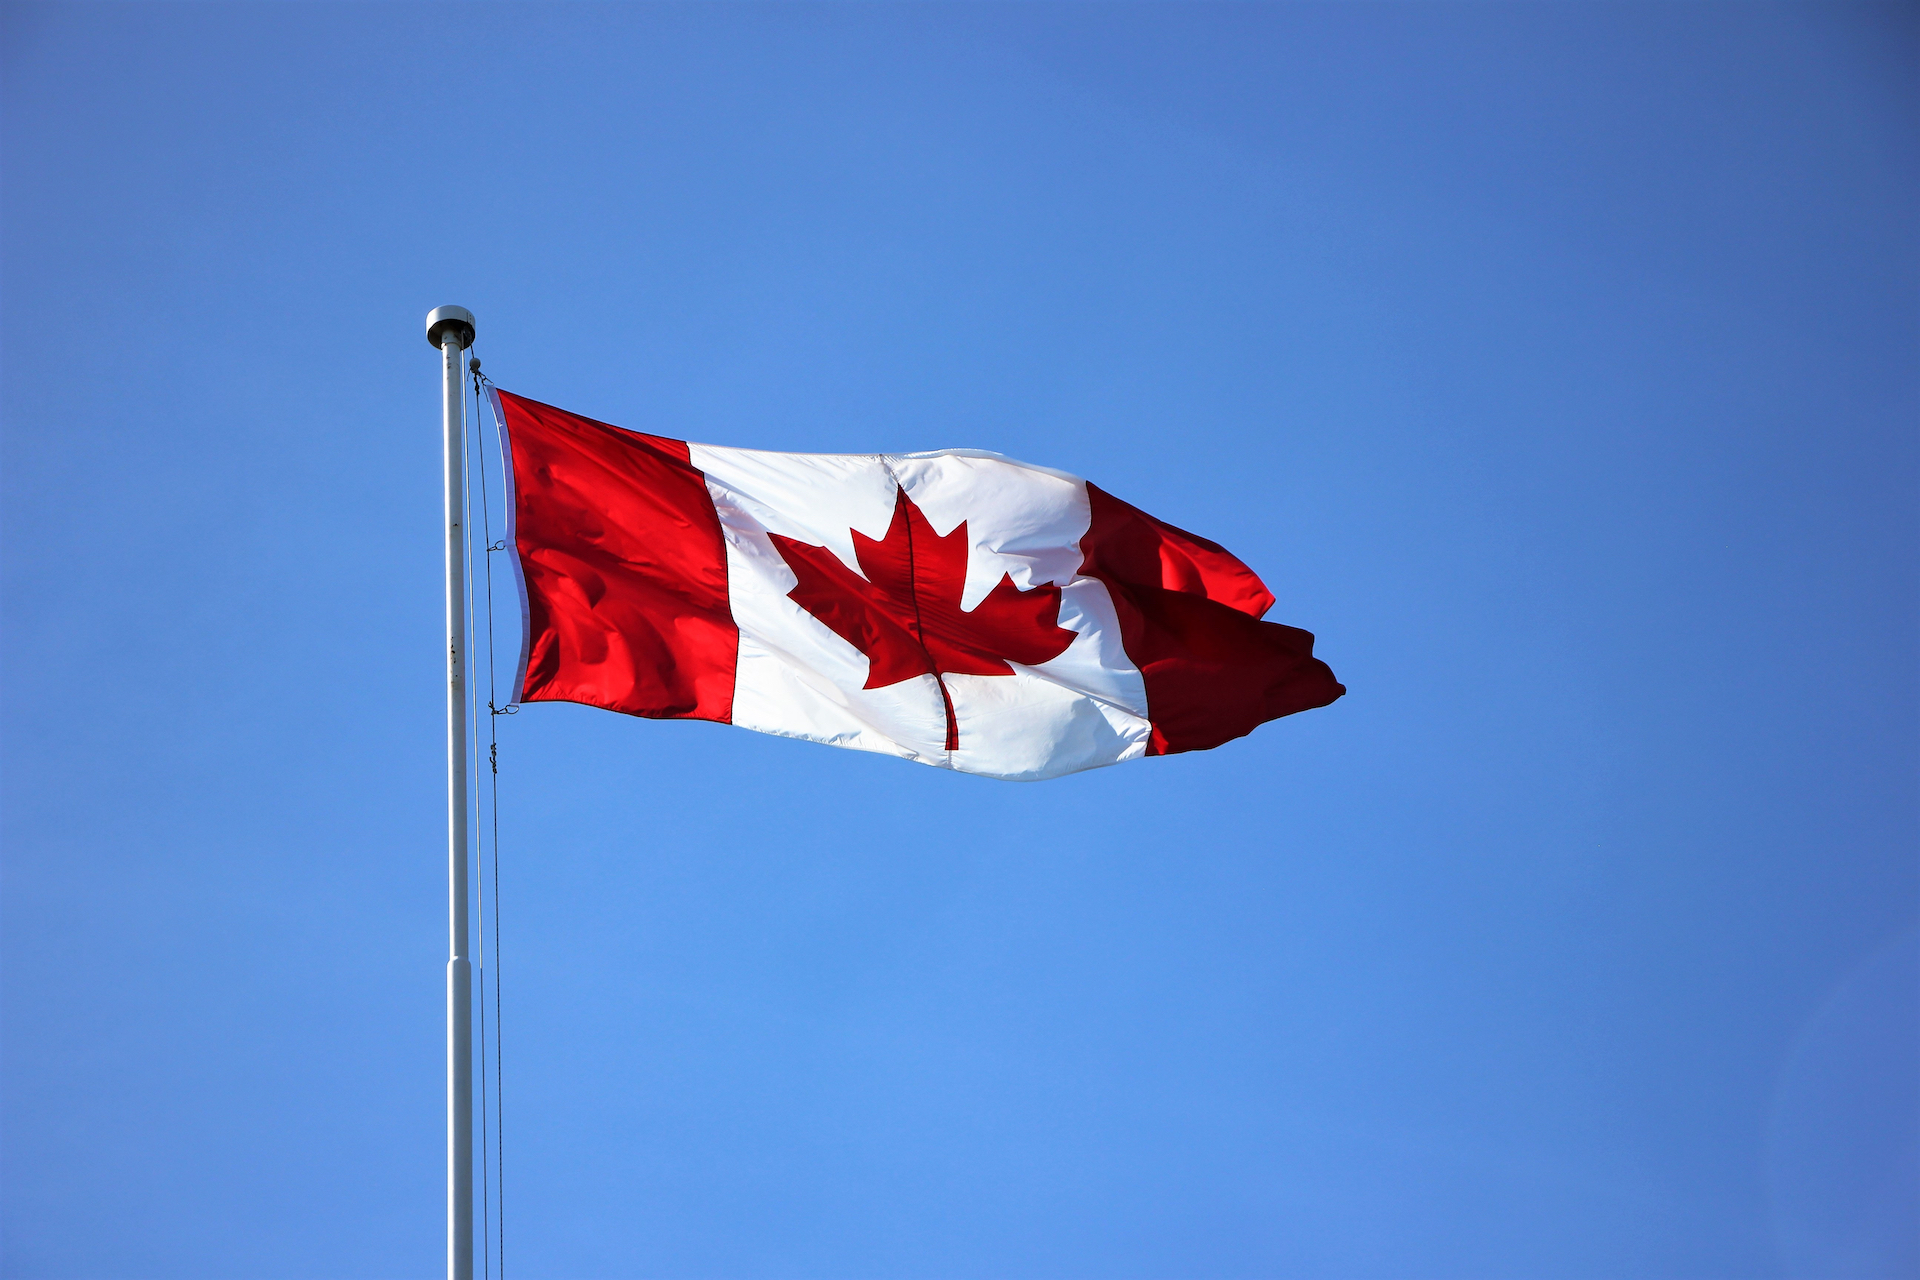 Canadian flag blowing in wind.